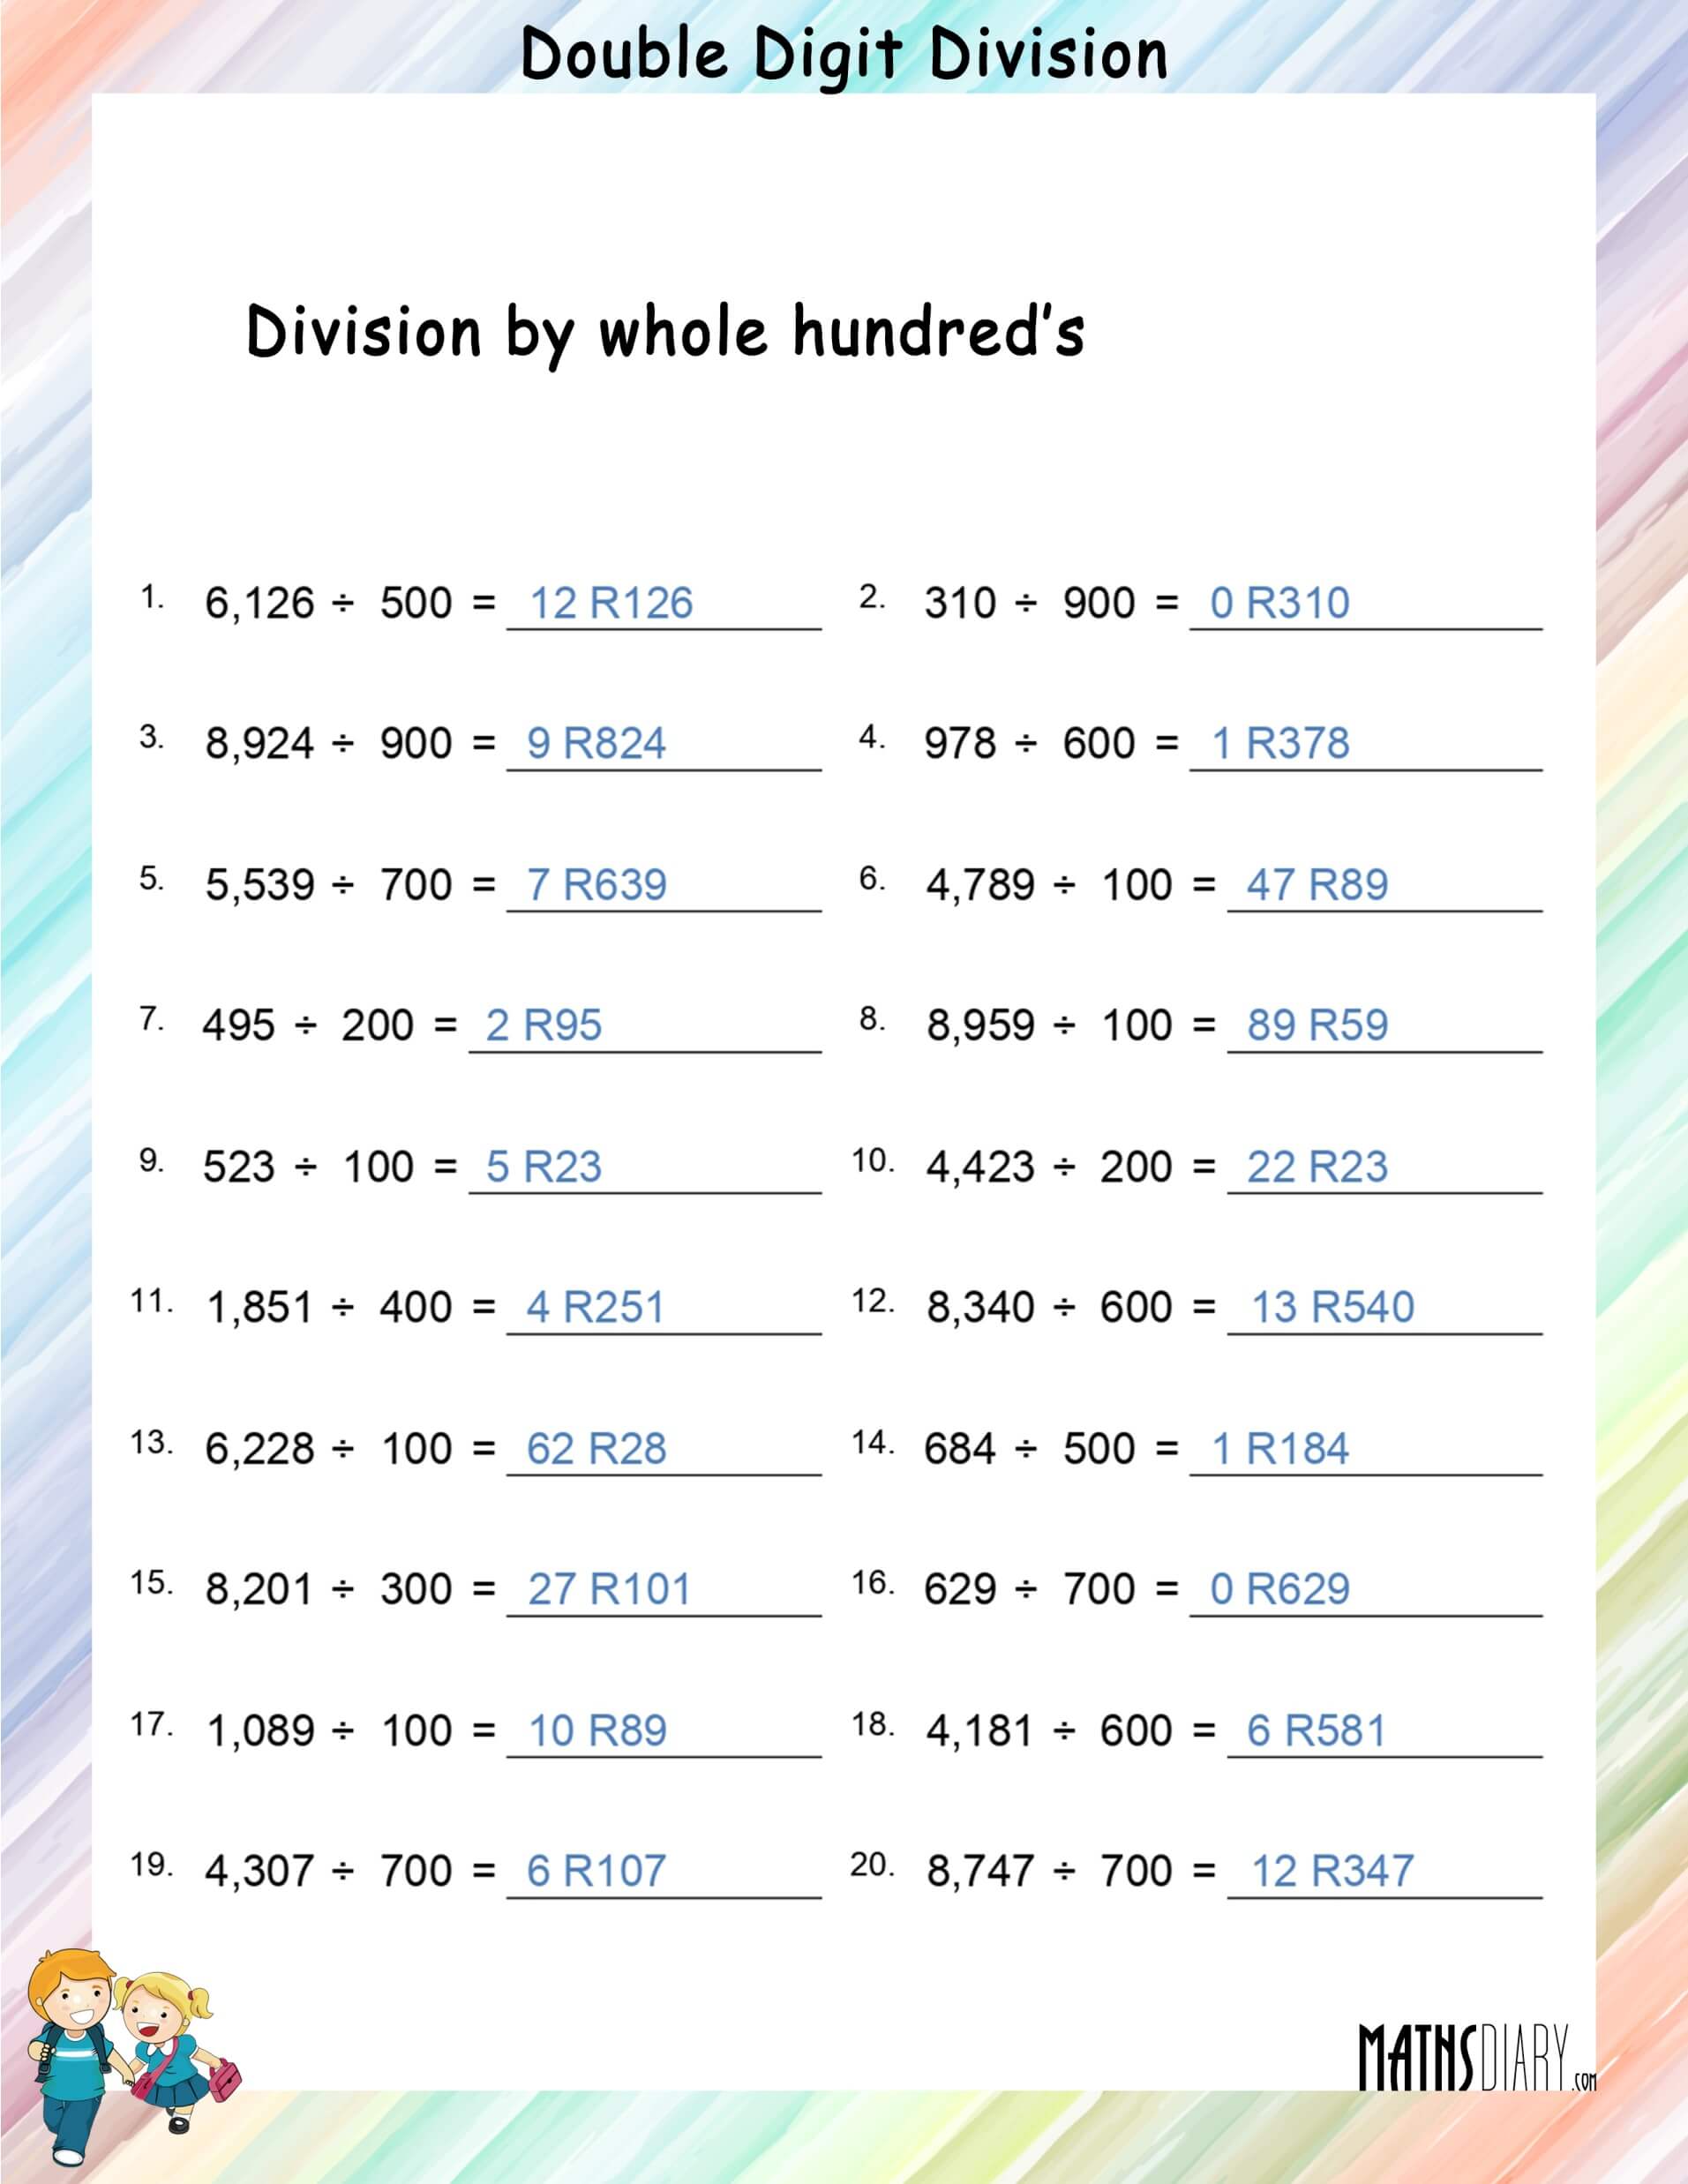 how do you do division 10division by 400 hunderd